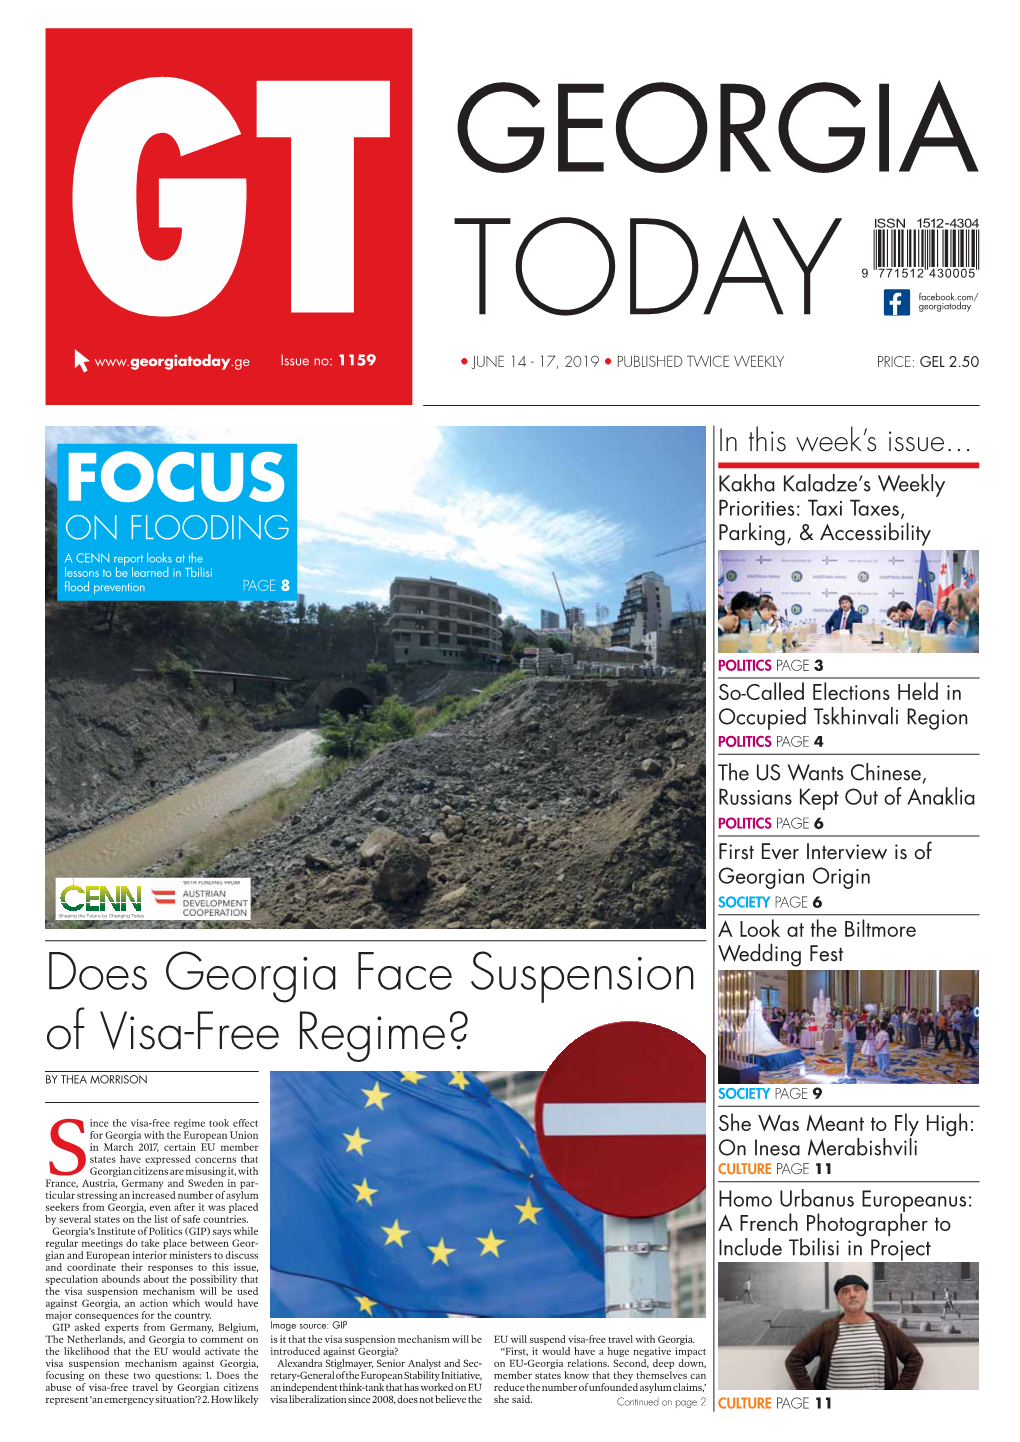 Does Georgia Face Suspension of Visa-Free Regime? Continued from Page 1 Alties